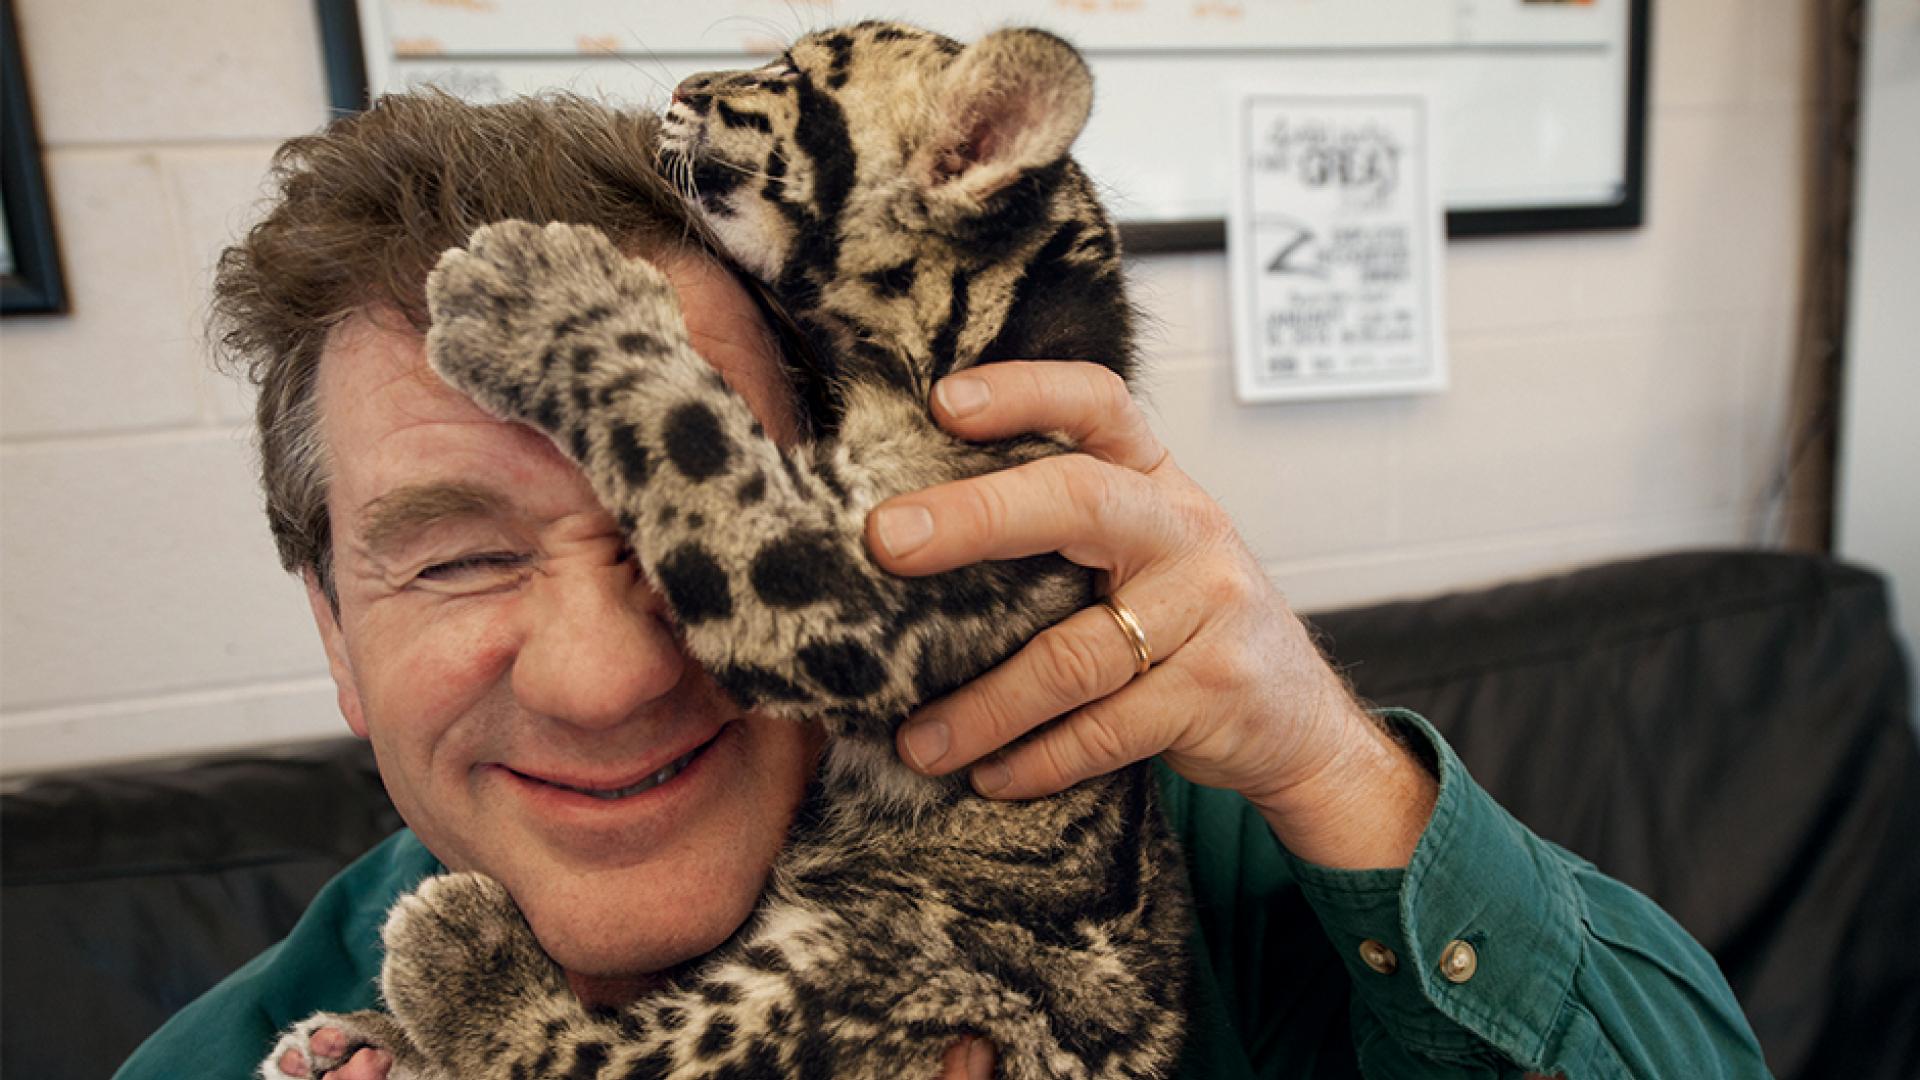 Man with a leopard cub climbing on his head.